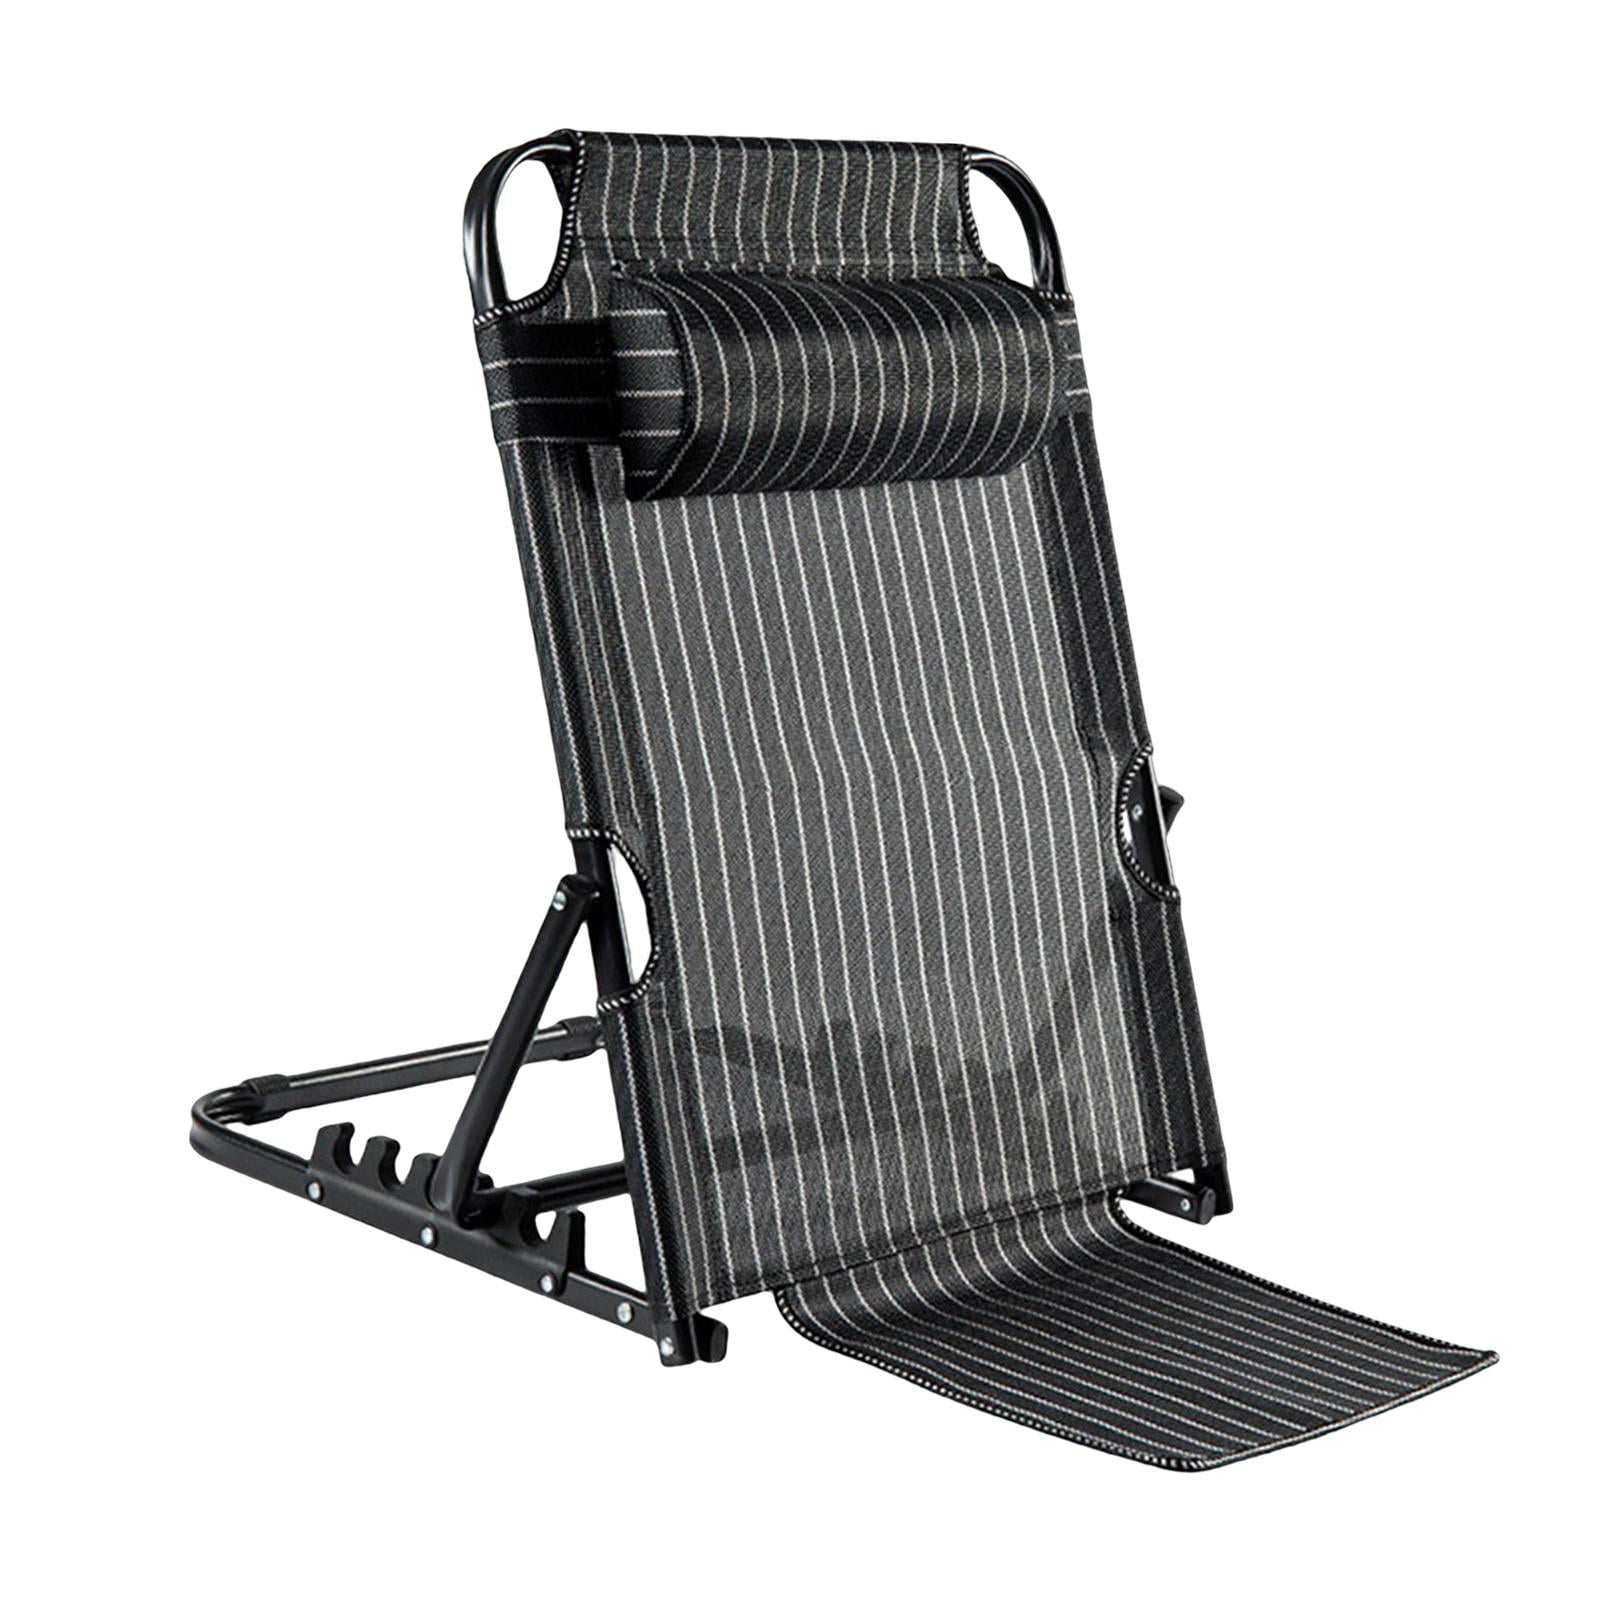 KAWACHI Recliner Back Rest Support Bed Chair Angle Adjustable